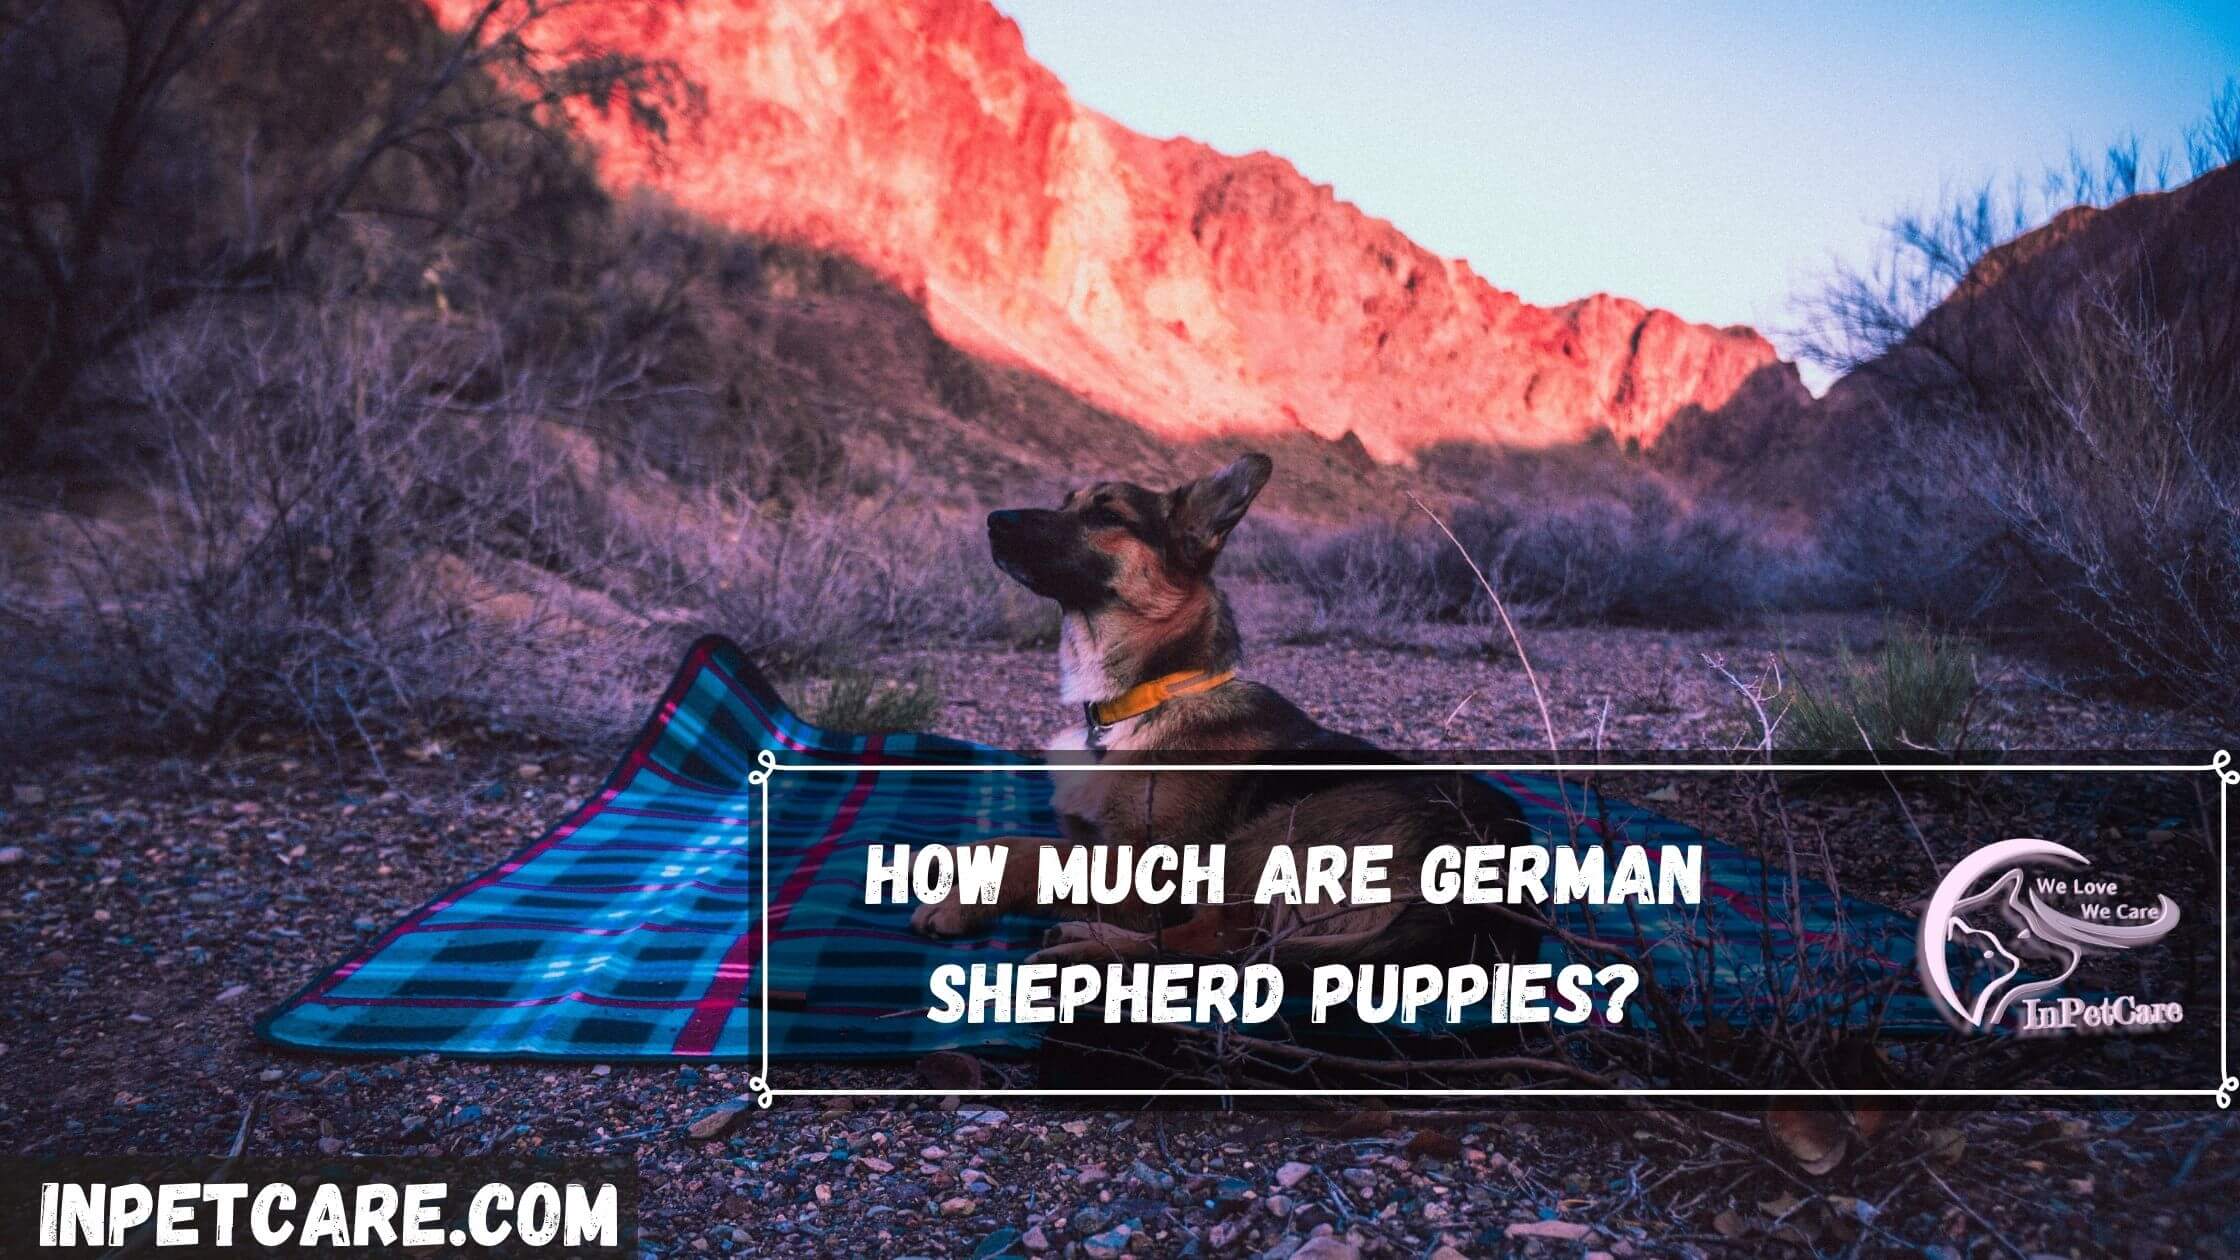 How Much Are German Shepherd Puppies?